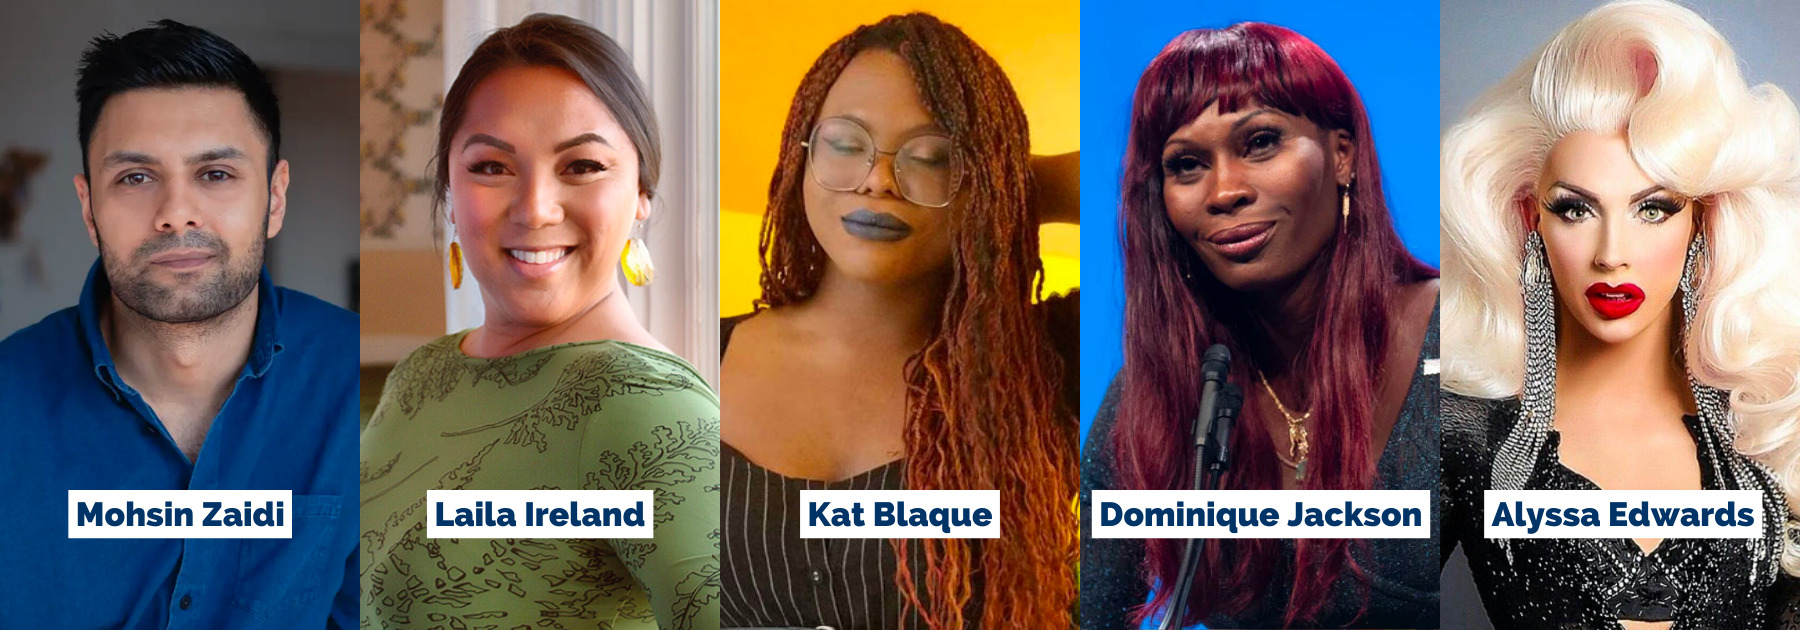 5 LGBTQ+ SPEAKERS TO KNOW FOR PRIDE MONTH 2022